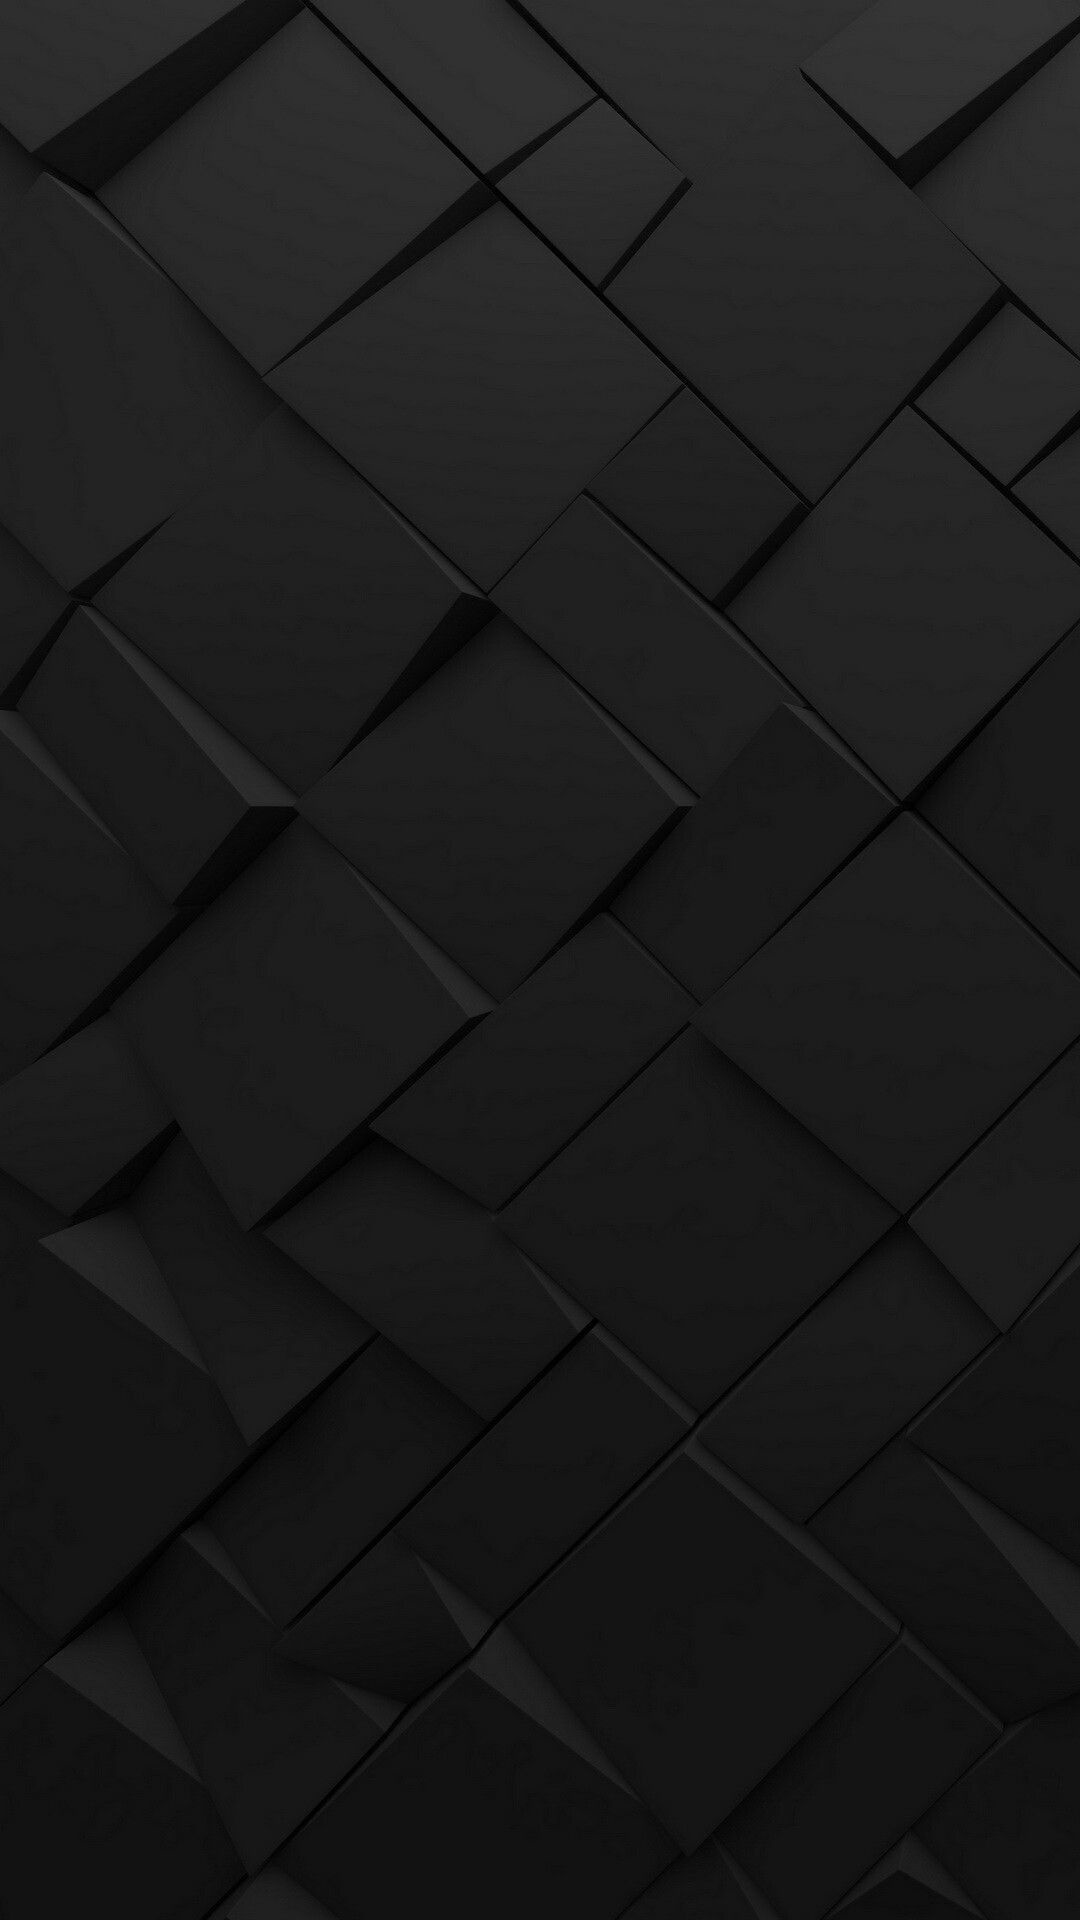 Black noir inspiration, Mysterious and chic, Simple yet captivating, Bold phone wallpapers, 1080x1920 Full HD Phone